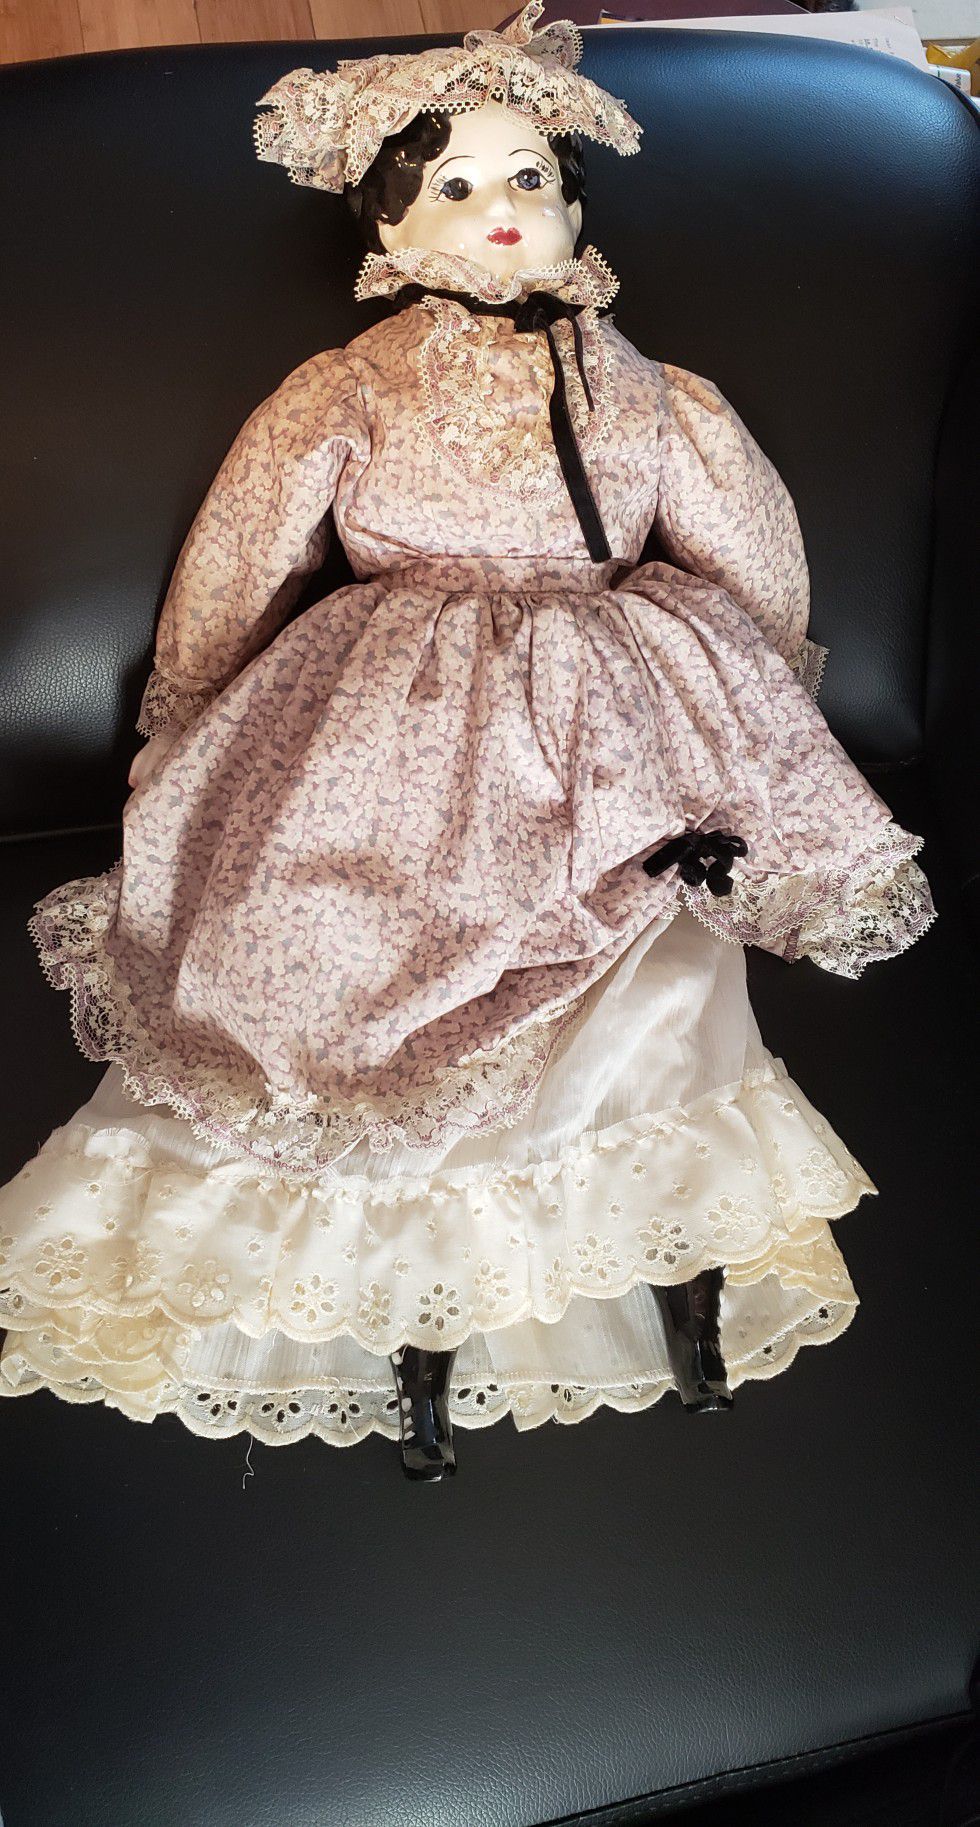 Vintage Chinese Head doll